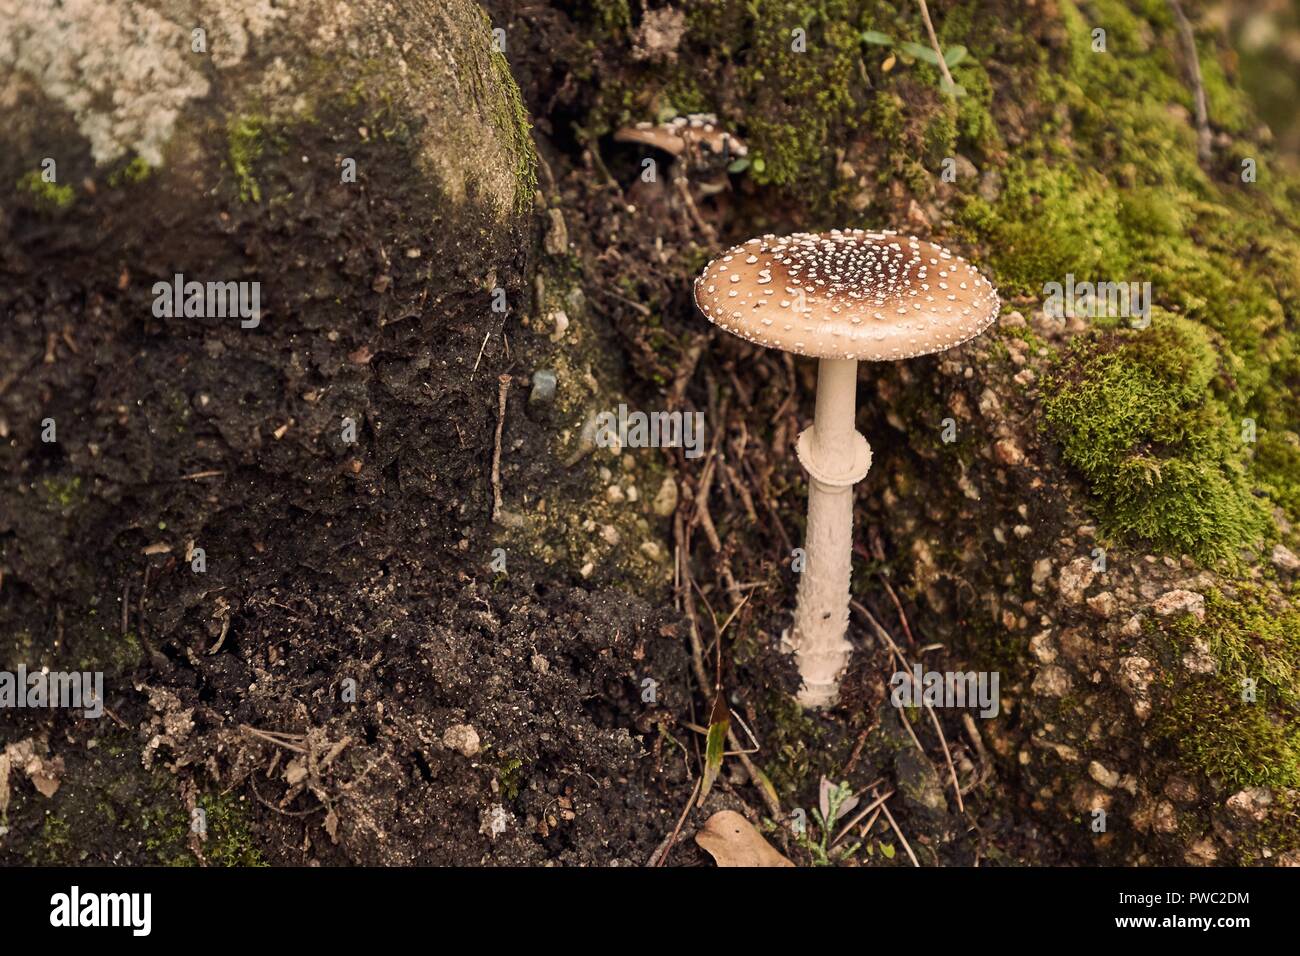 Mushroom growing in a forest Stock Photo